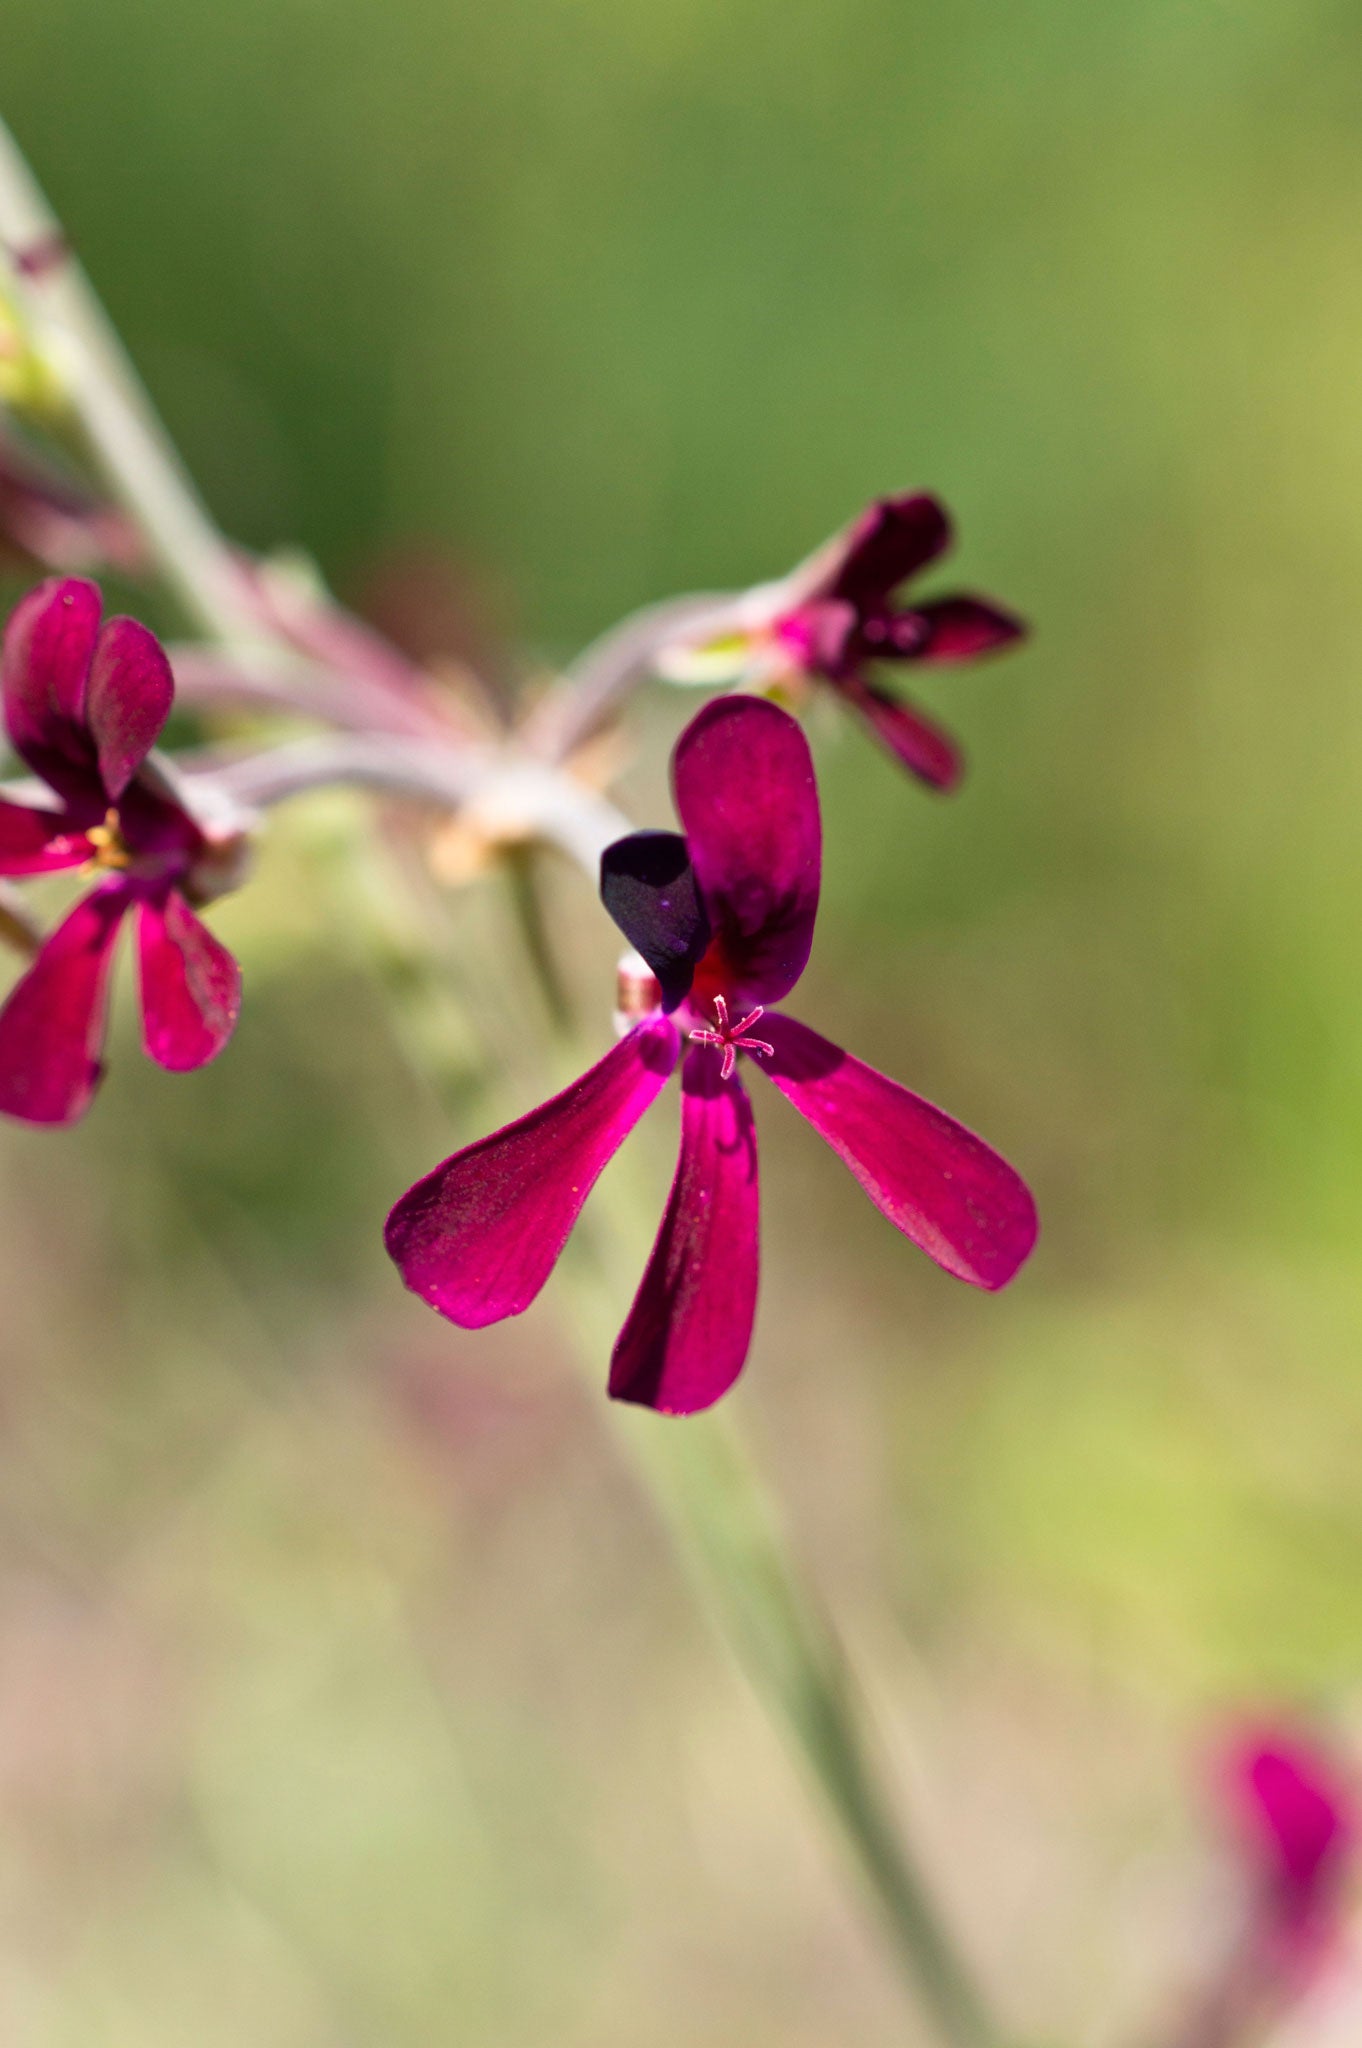 With tiny, feathery flowers, in deep velvety shades, Pelargonium sidoides is a belter